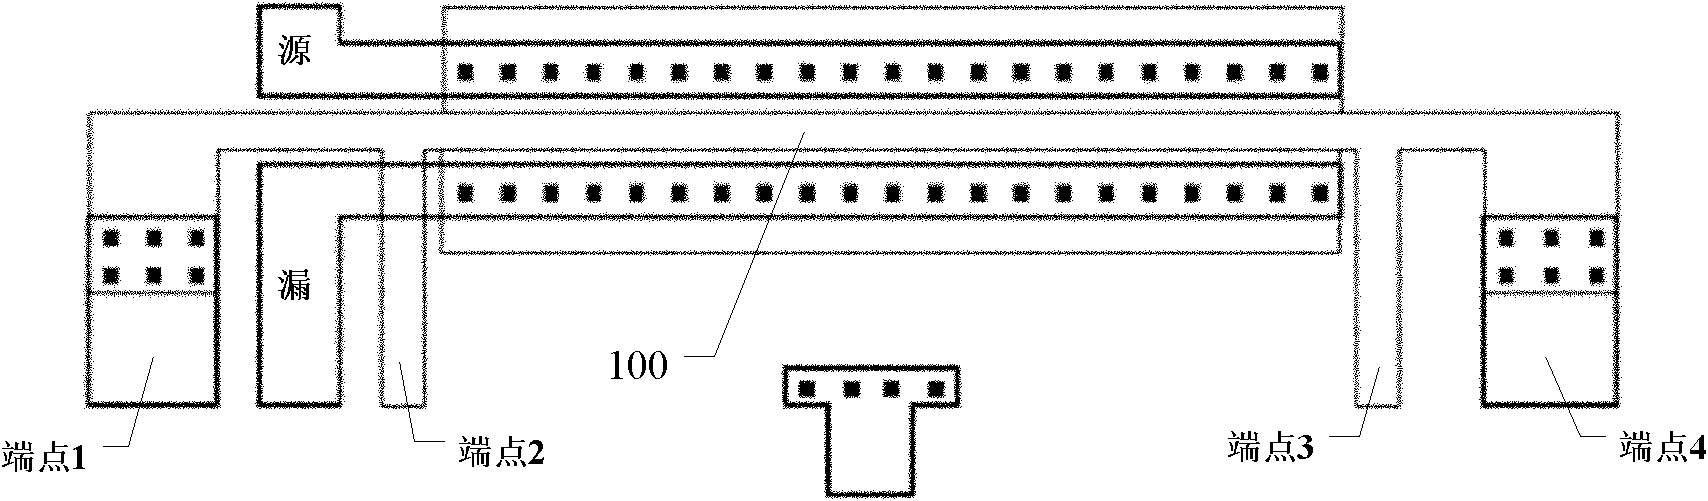 Structure and method for measuring electric property change of MOSFET (metal-oxide-semiconductor field effect transistor) device